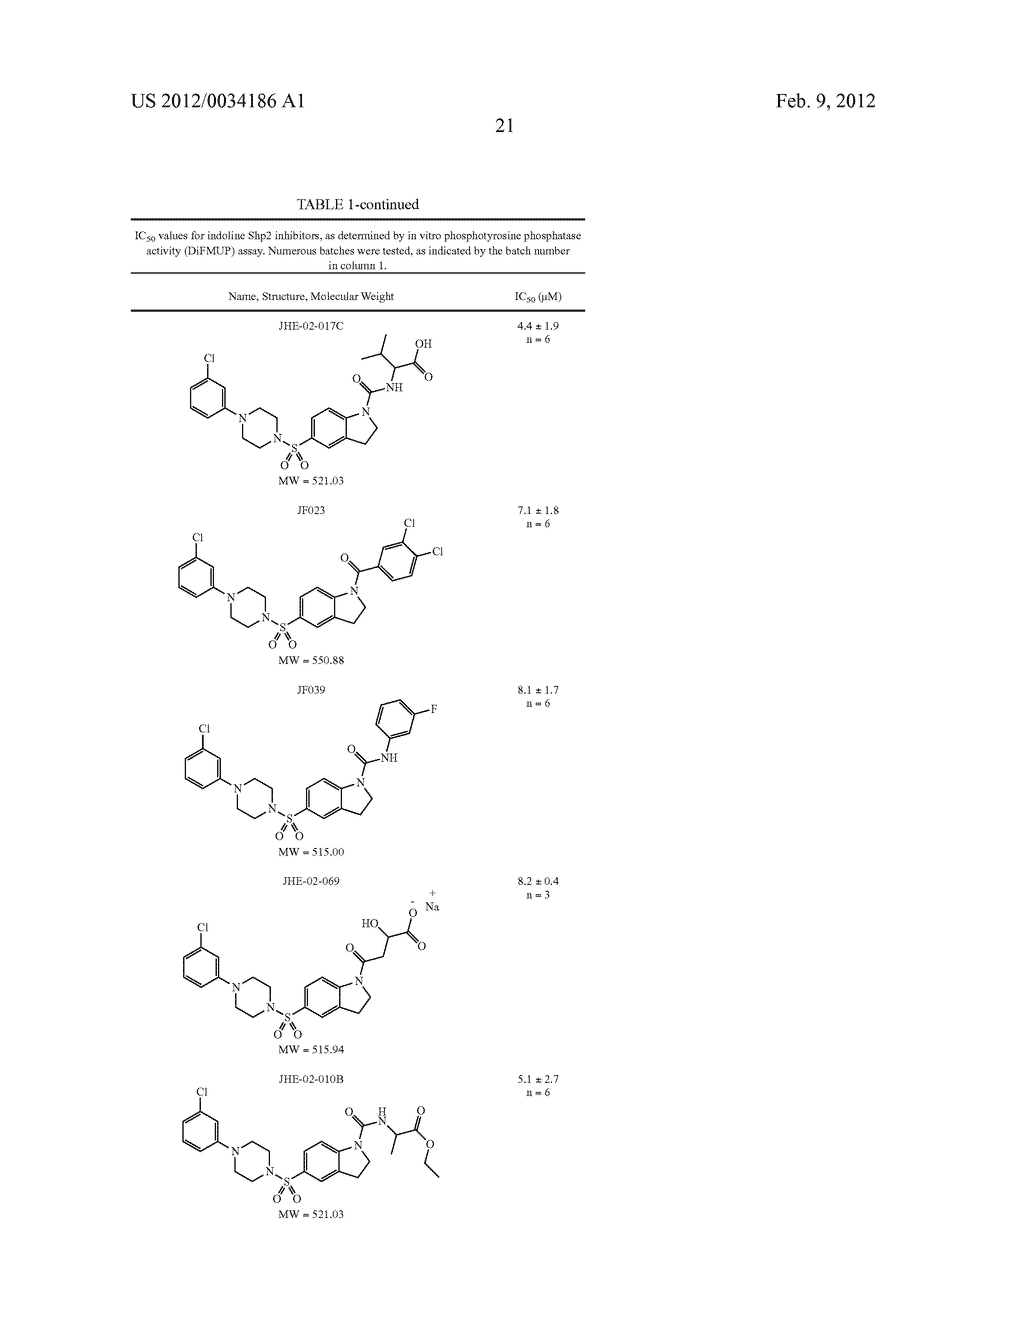 INDOLINE SCAFFOLD SHP-2 INHIBITORS AND METHOD OF TREATING CANCER - diagram, schematic, and image 41